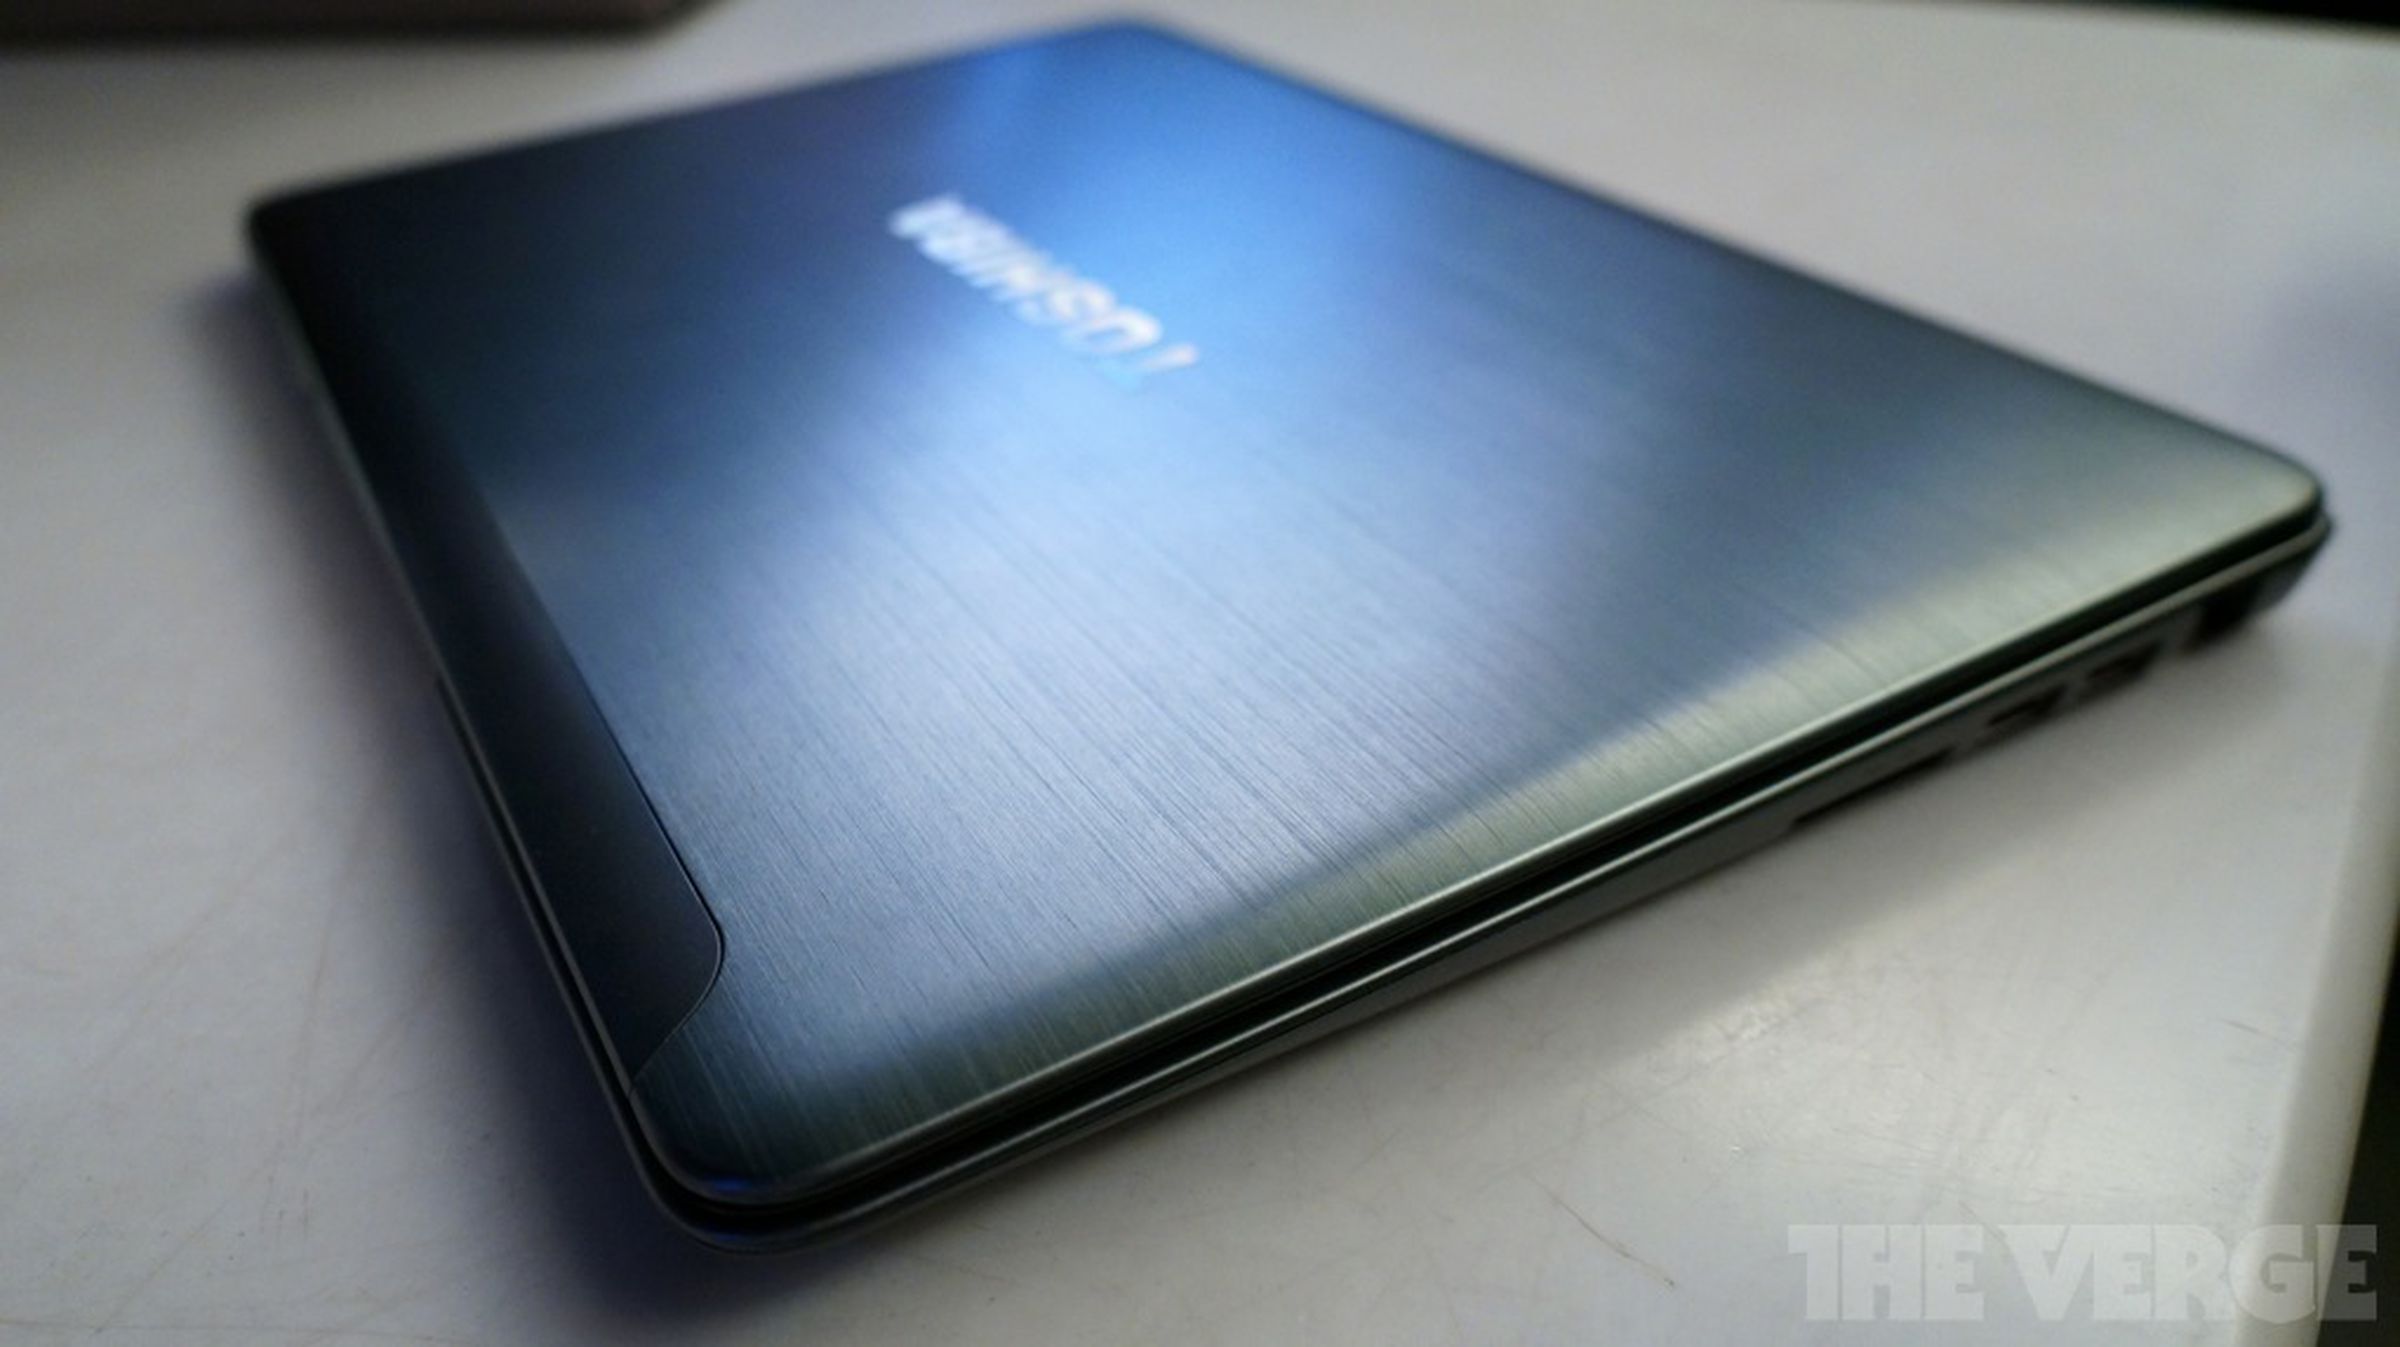 Toshiba Satellite U840 hands-on pictures